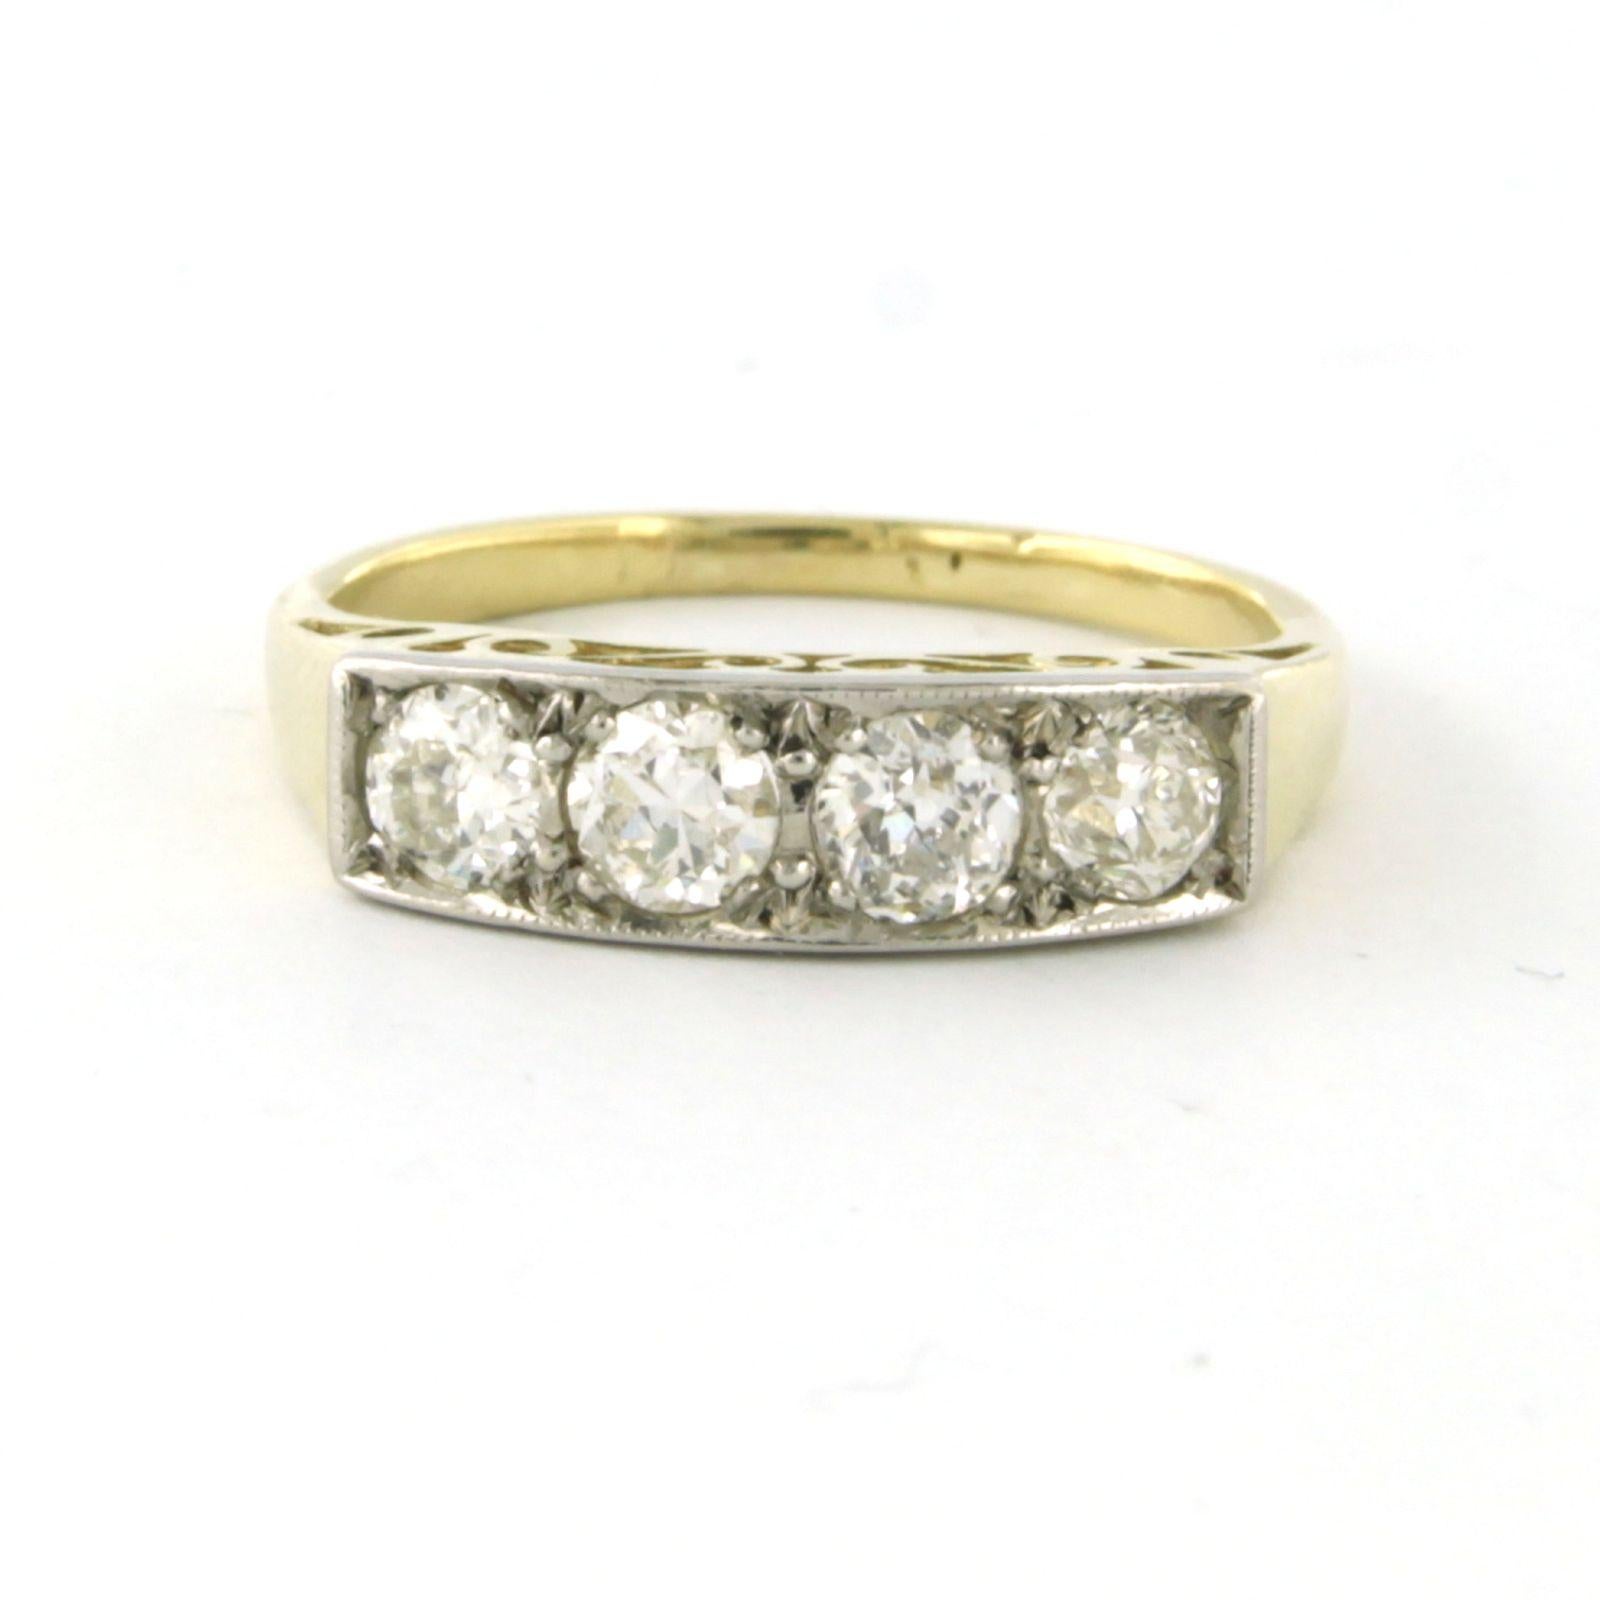 14k bicolour gold ring set met old mine cut diamonds 0.65 ct F/G SI - ring size US 4.75 / EU 15.5 (49)

Detailed description

the top of the ring is 4.5 mm wide, and 4.2 mm high

weight 2.3 grams

ring size US 4.75 - EU 15.5 (49), ring can be